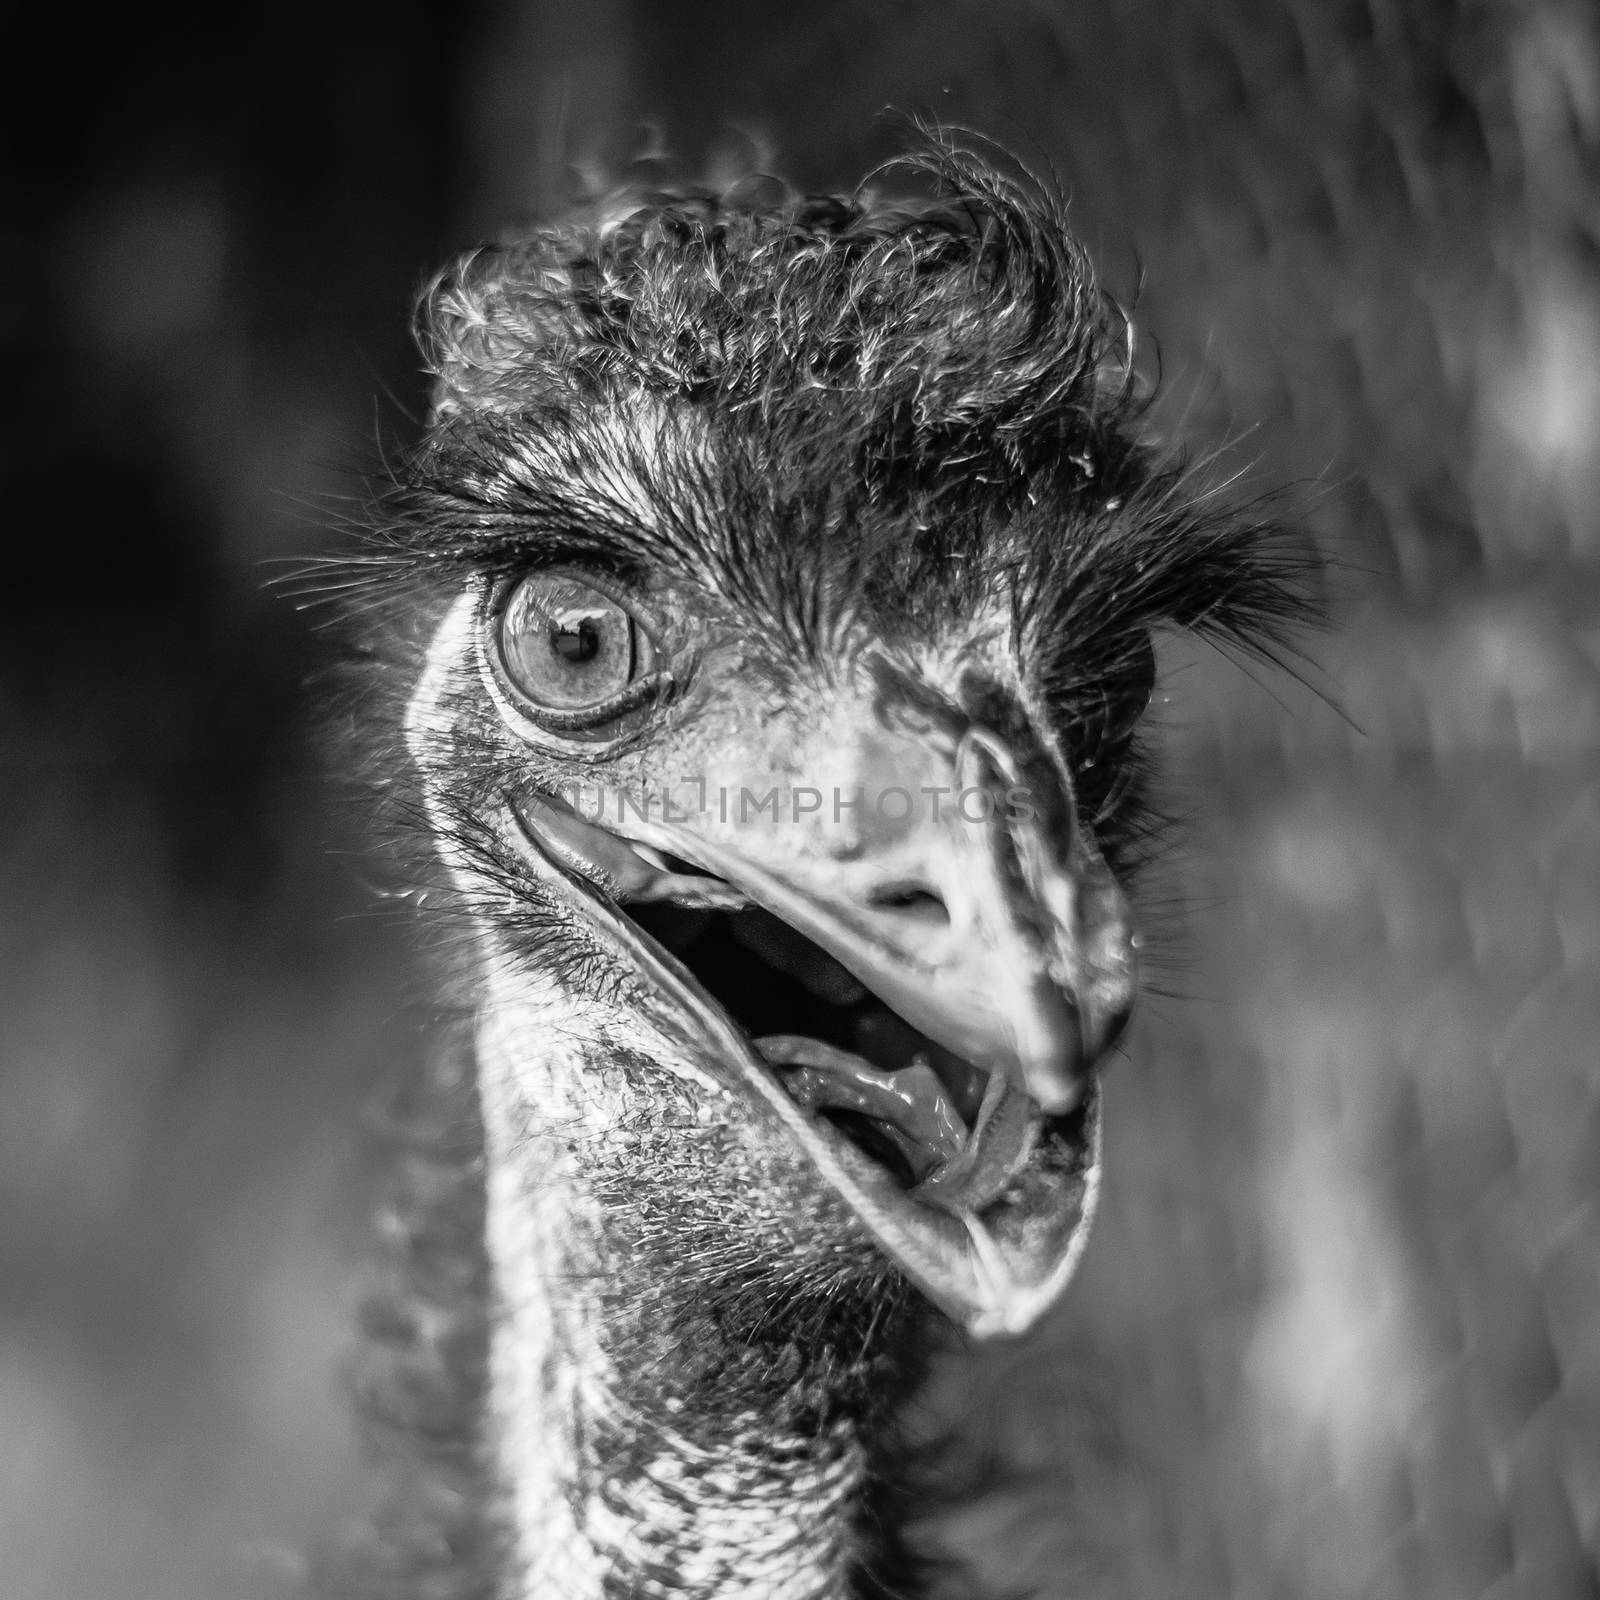 Emu by itself outdoors during the daytime. by artistrobd